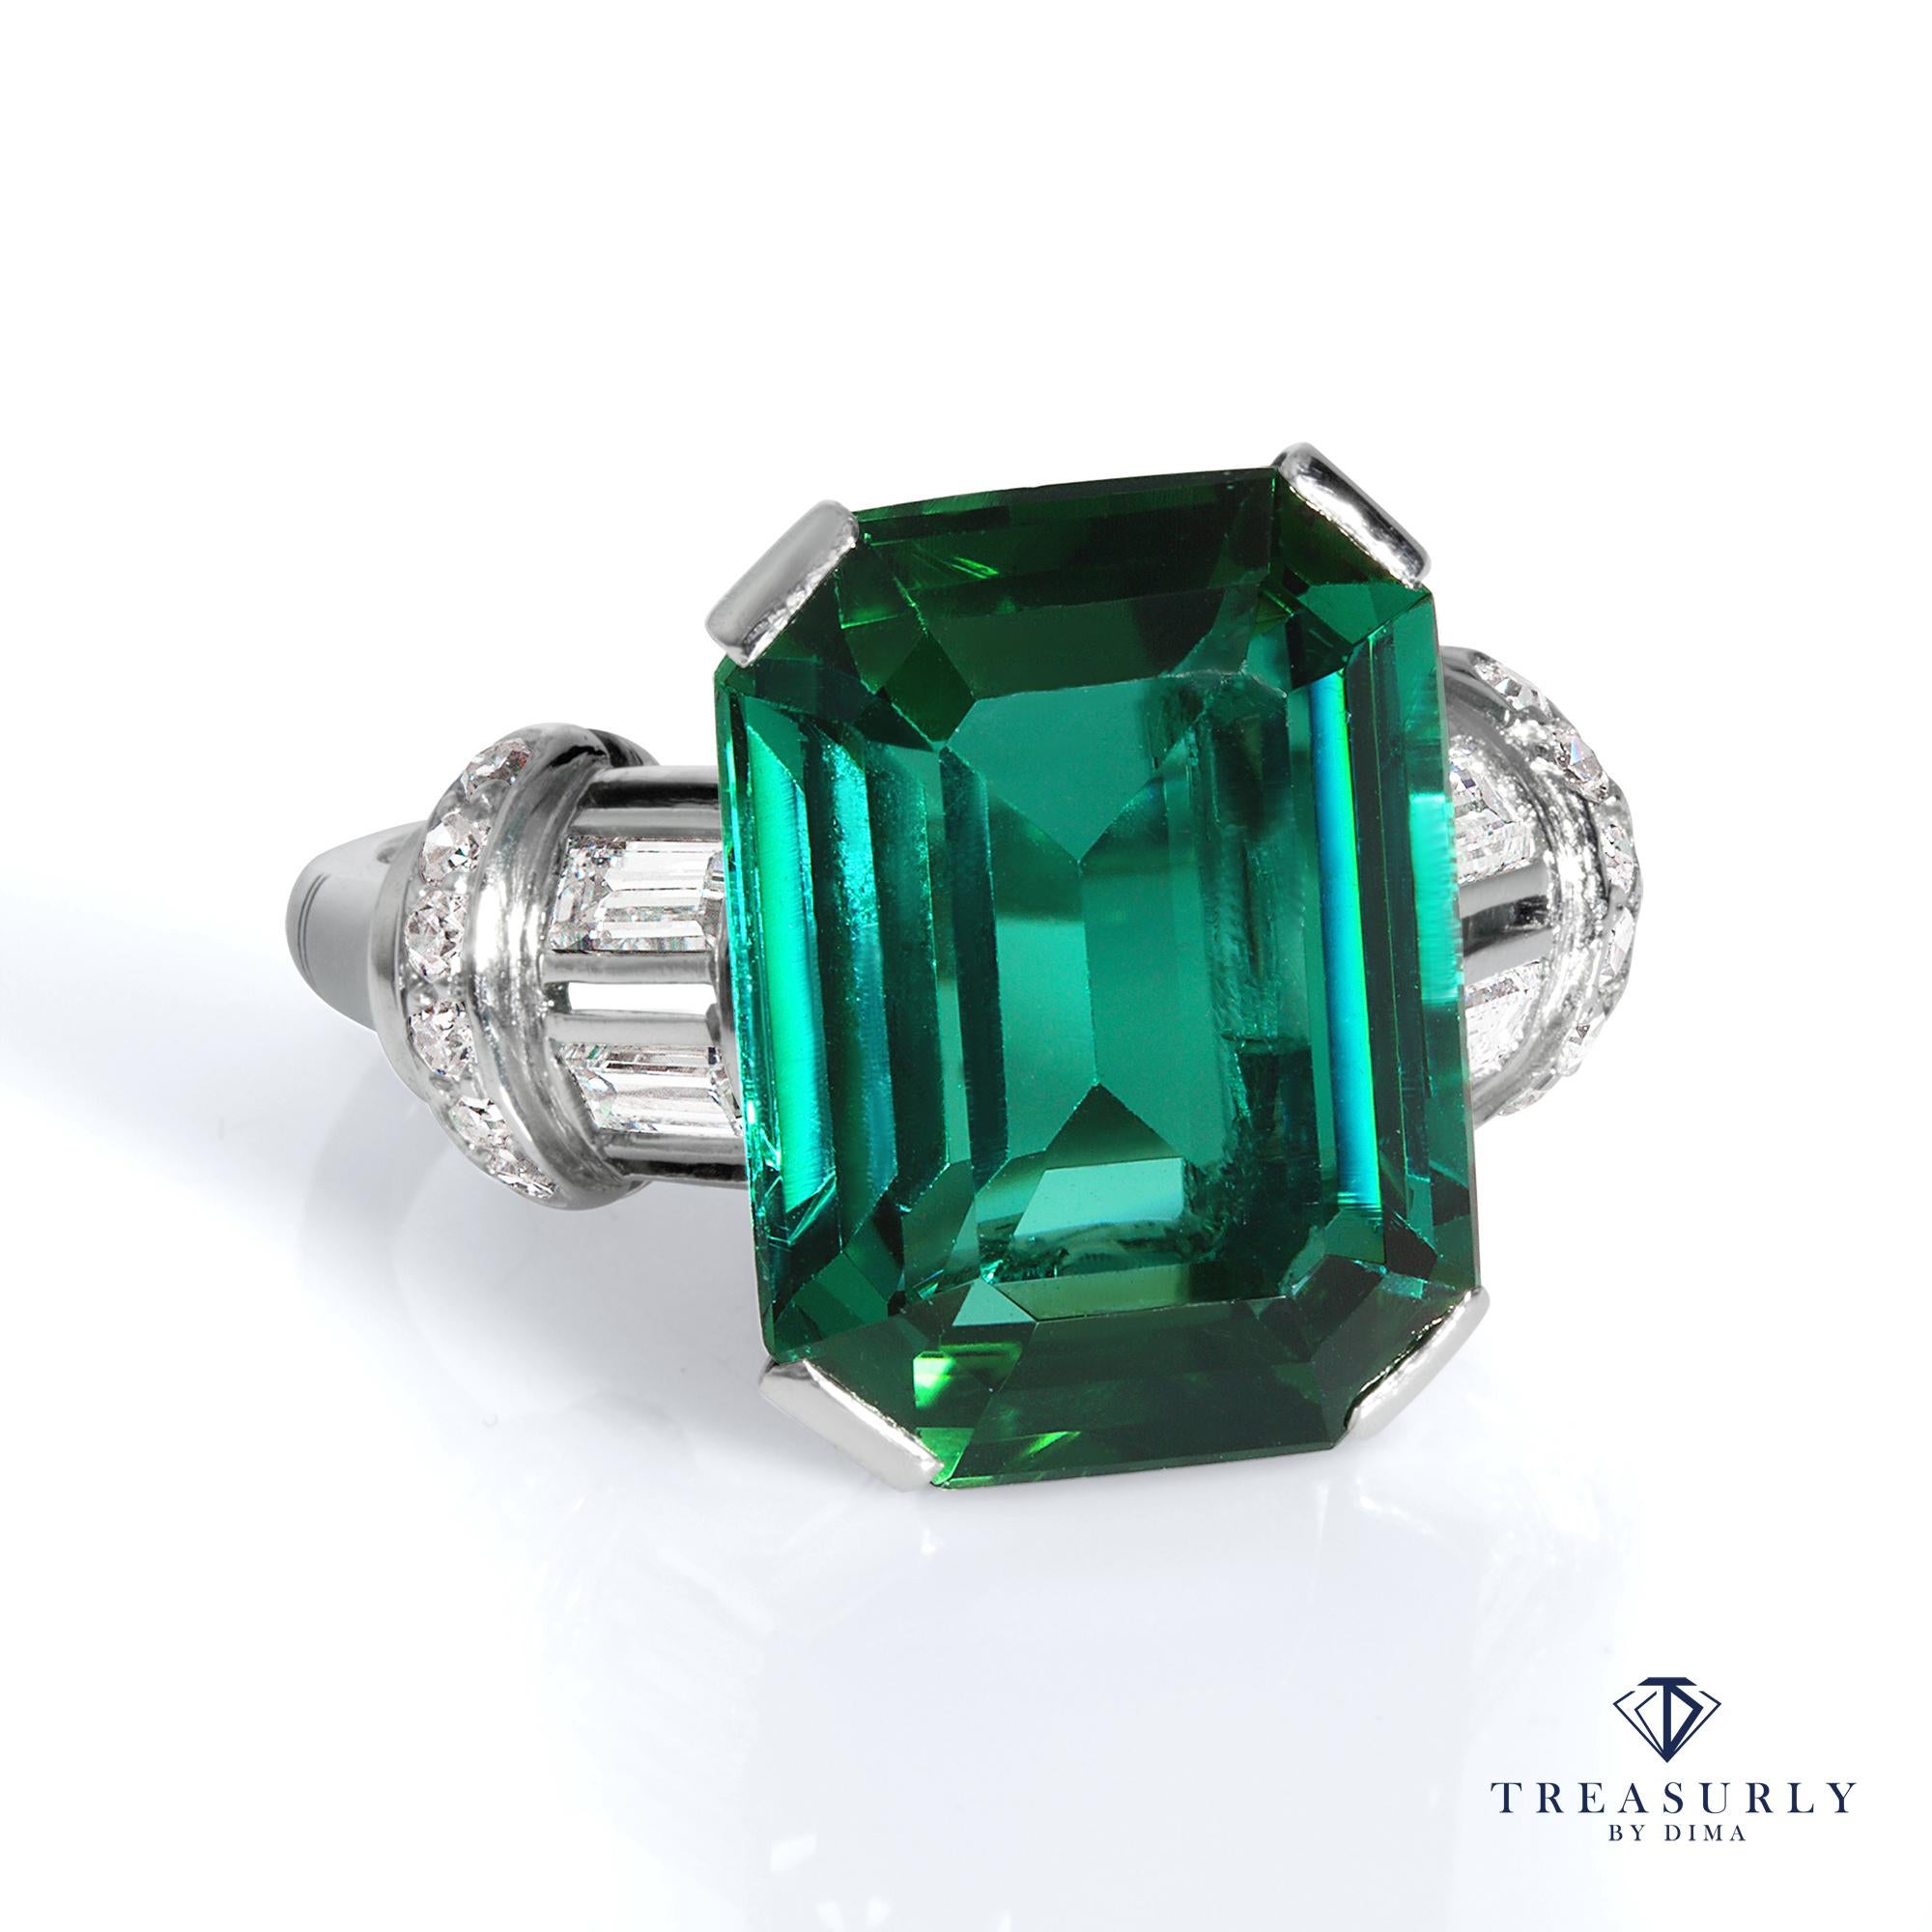 GIA 8.72ct Green-Blue Tourmaline in Original Art Deco Diamond Platinum Ring.

The finest examples of Art Deco engagement rings were hand fabricated and impeccably finished with hand tooled engraving . No expense was spared in producing these